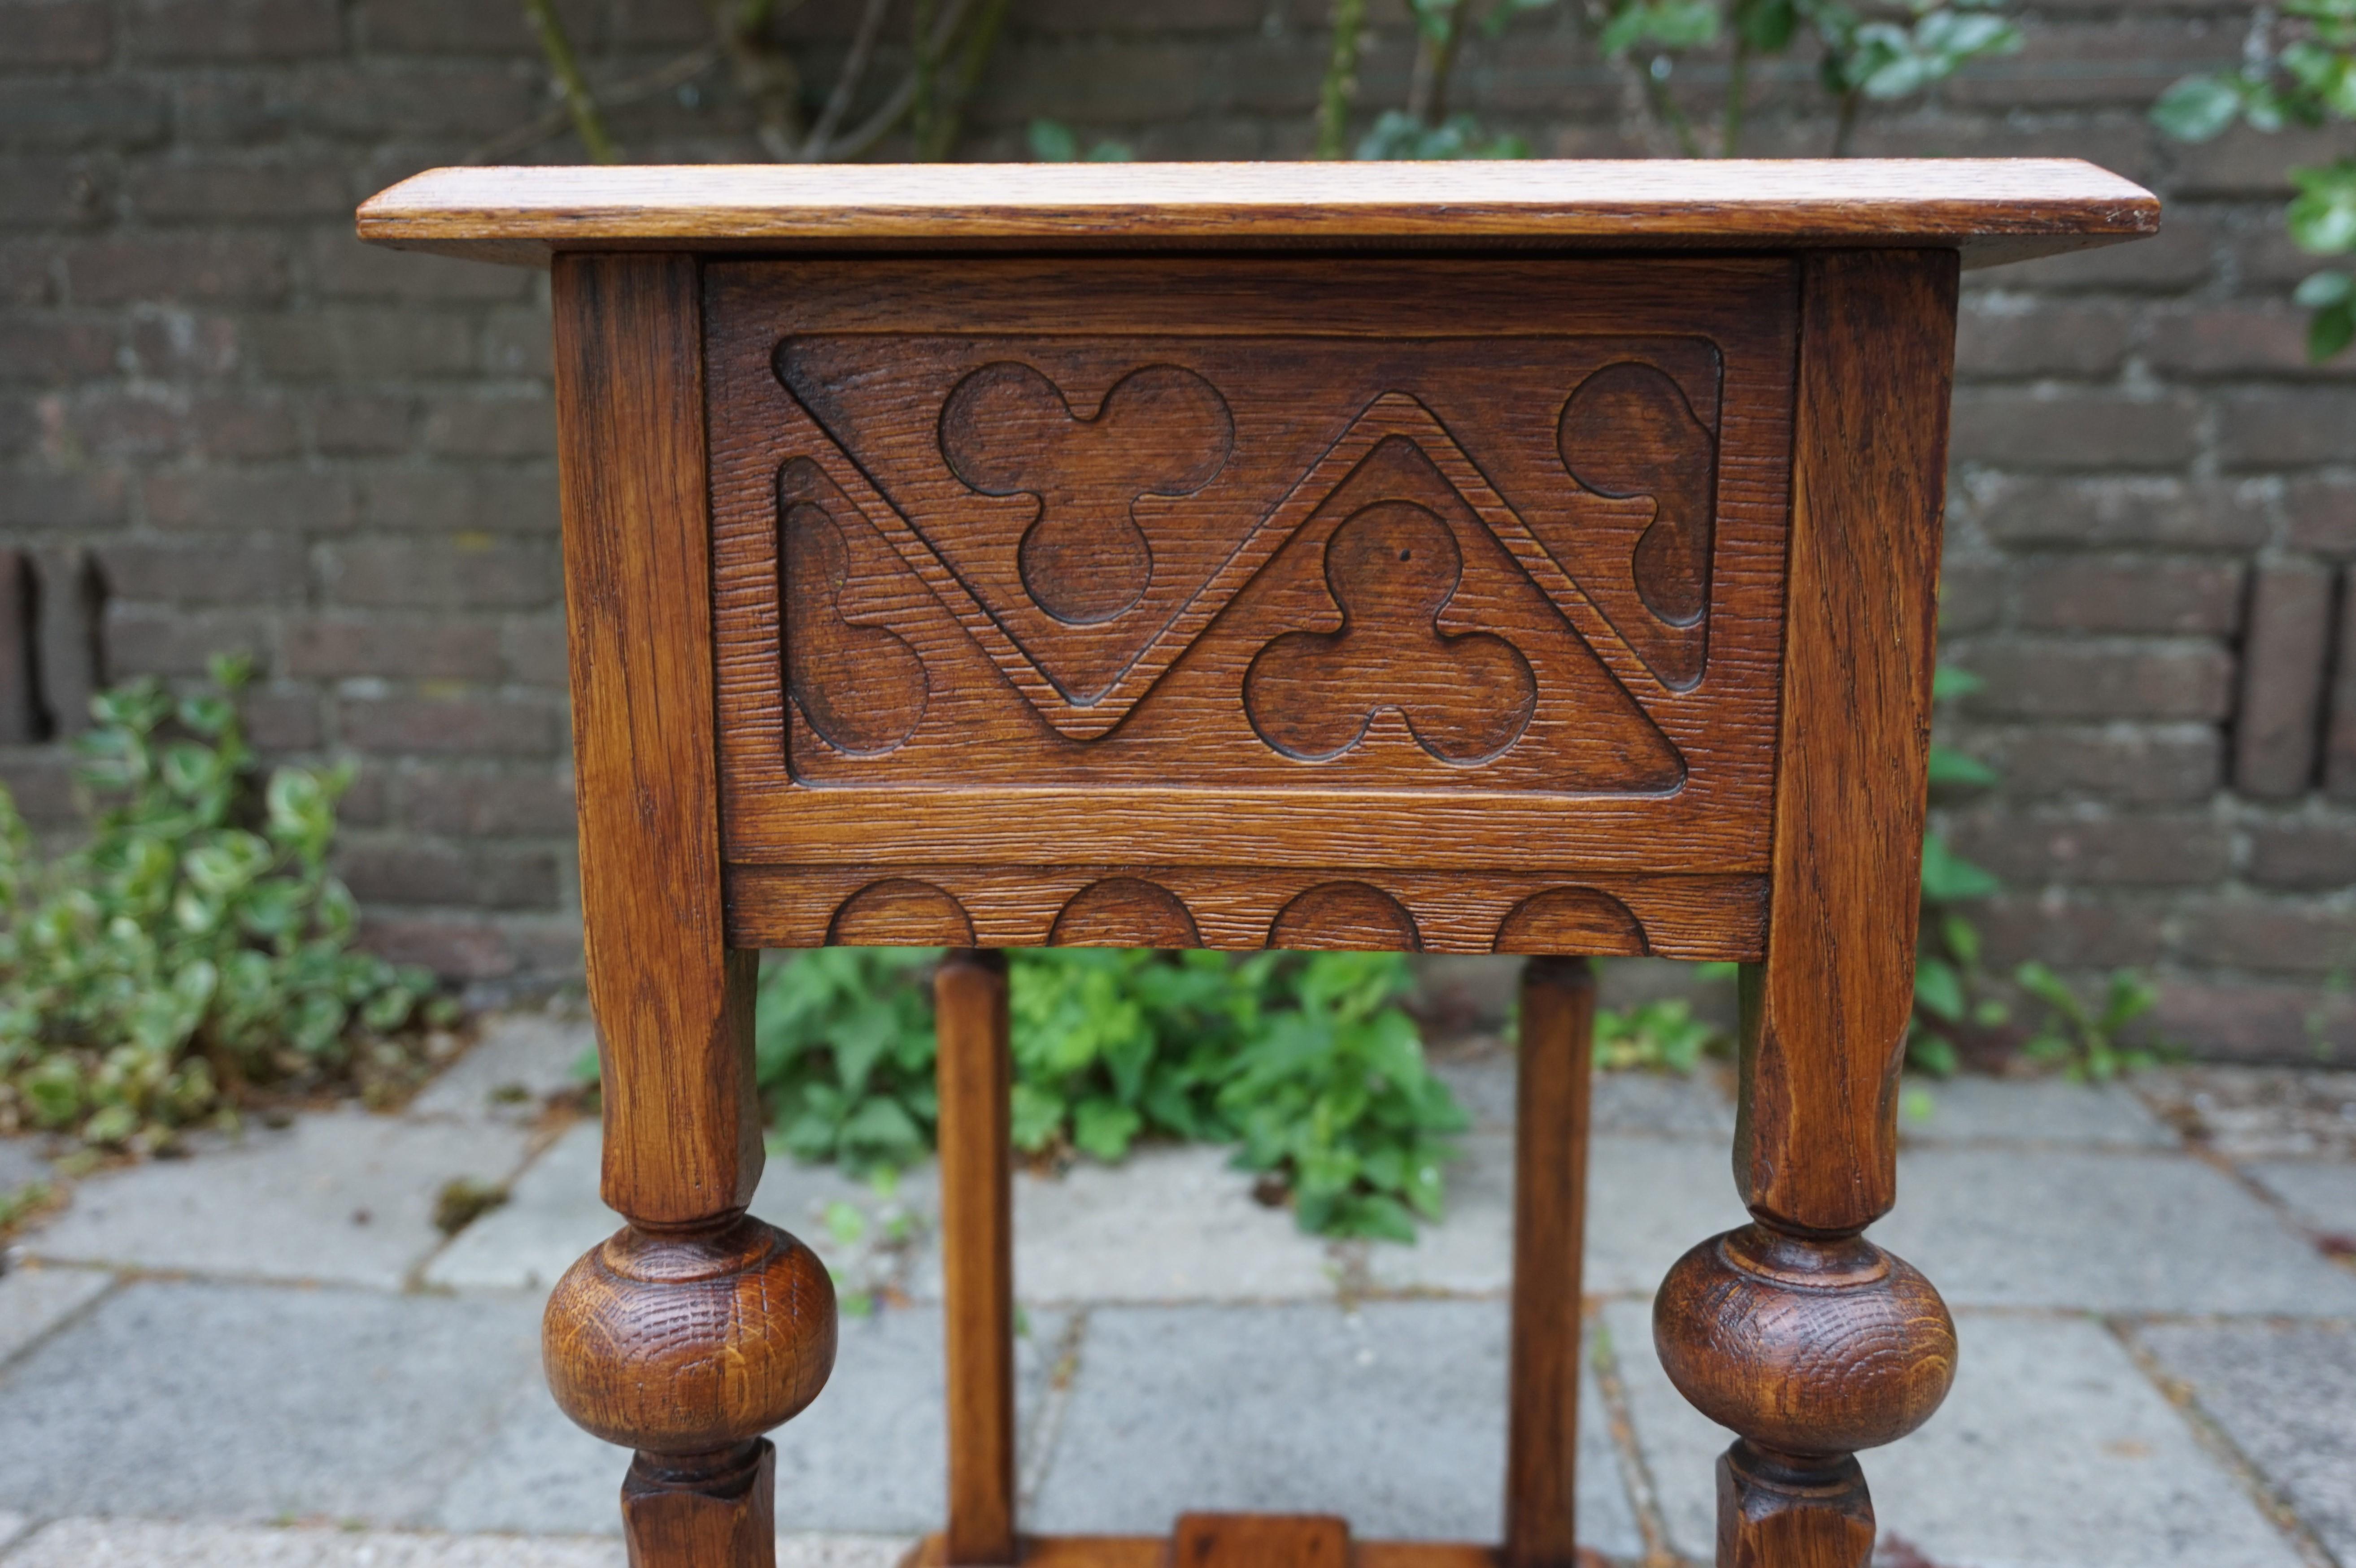 Early 1900s Handcrafted Gothic Revival Work or Side Table with Trefoil Decor 4